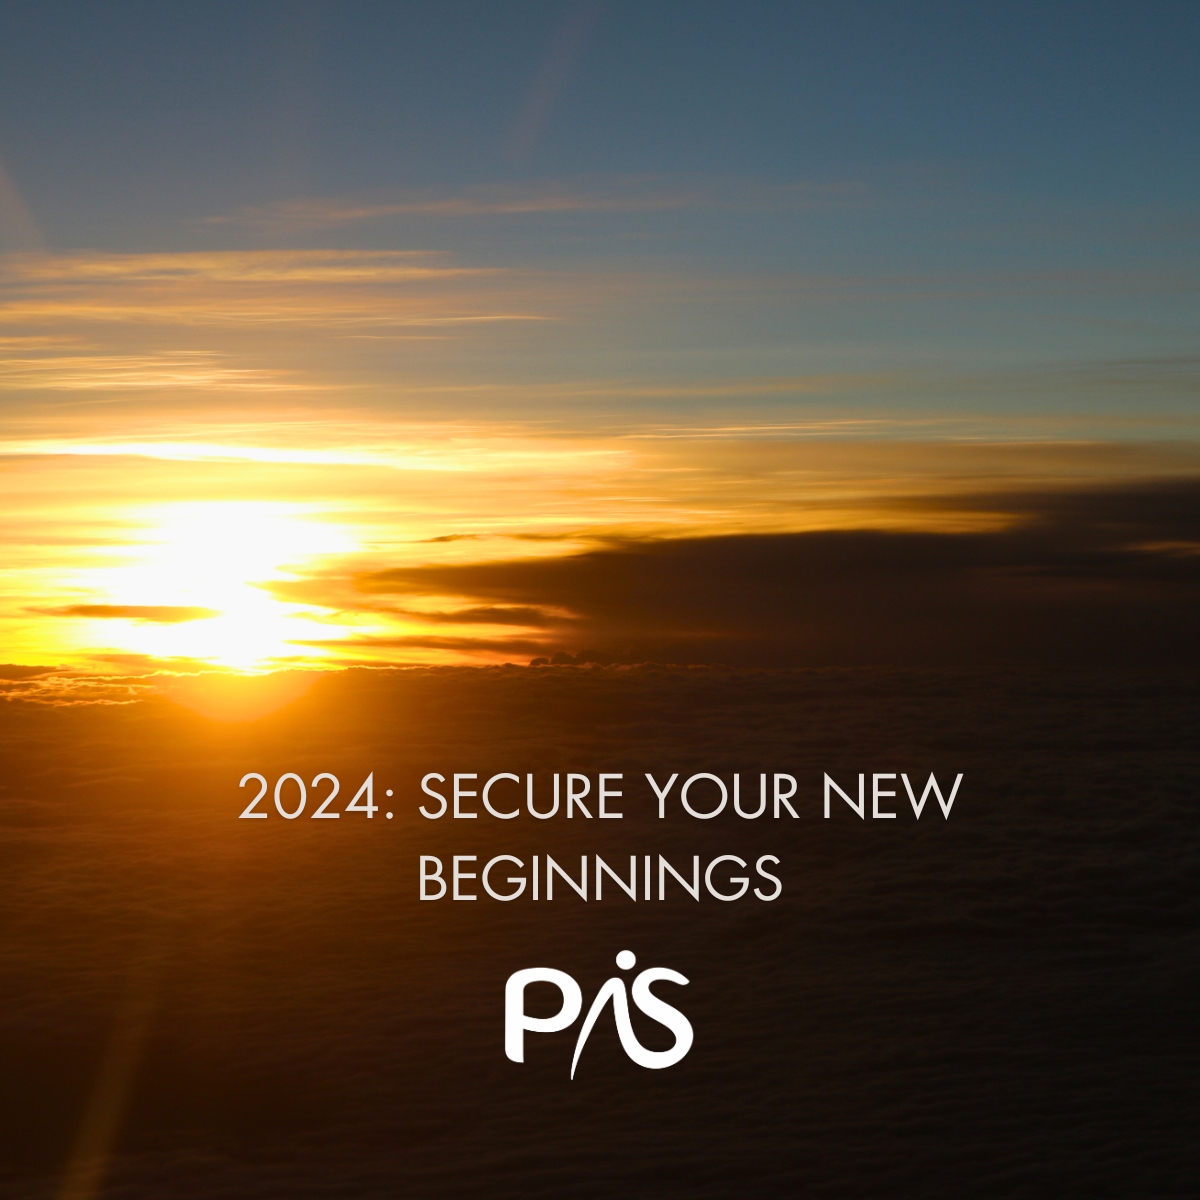 Welcome 2024: a canvas of new possibilities! Embrace fresh starts and secure your dreams with PIS. Let’s make each opportunity a step toward success. Ready for a year of security and prosperity?

Share your 2024 goals with us!

#NewYearNewBeginnings #Secure2024 #PISProtection